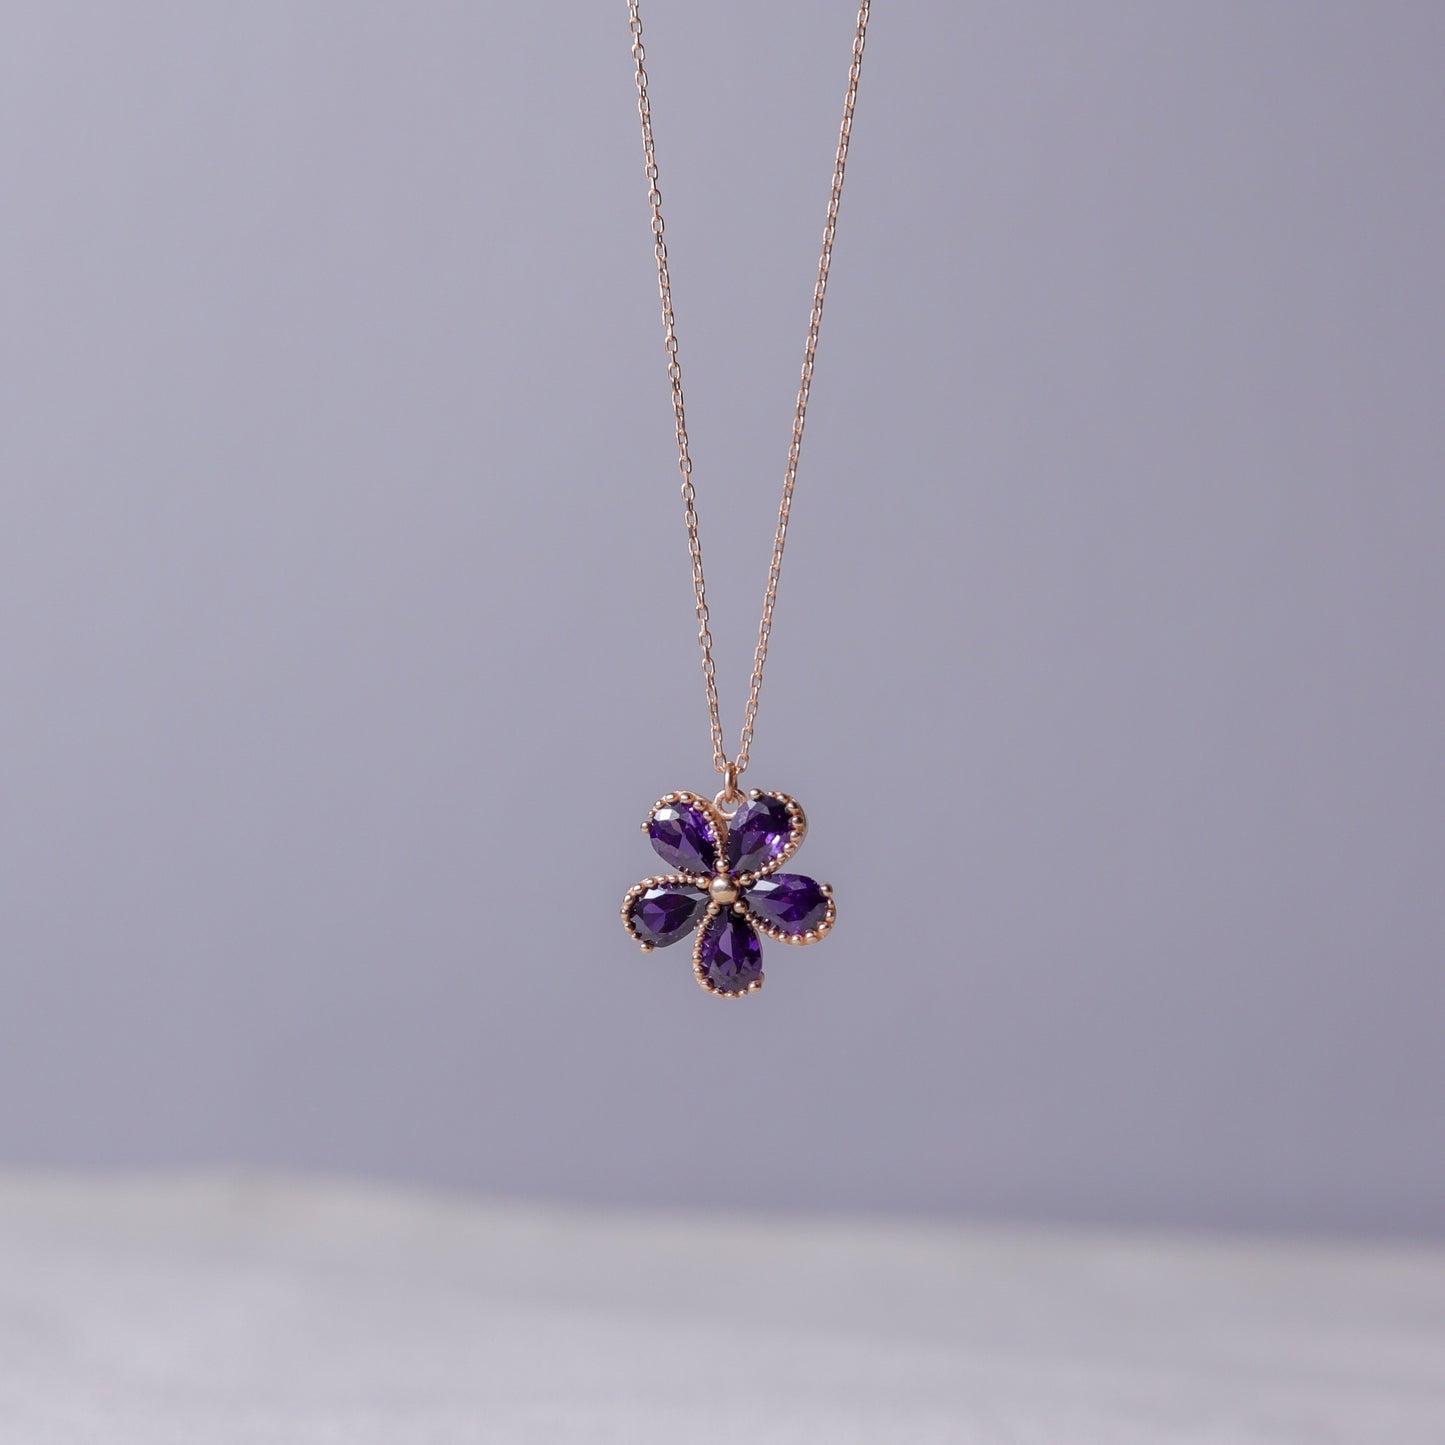 925 Sterling Silver Clover Necklace with Amethyst Stone